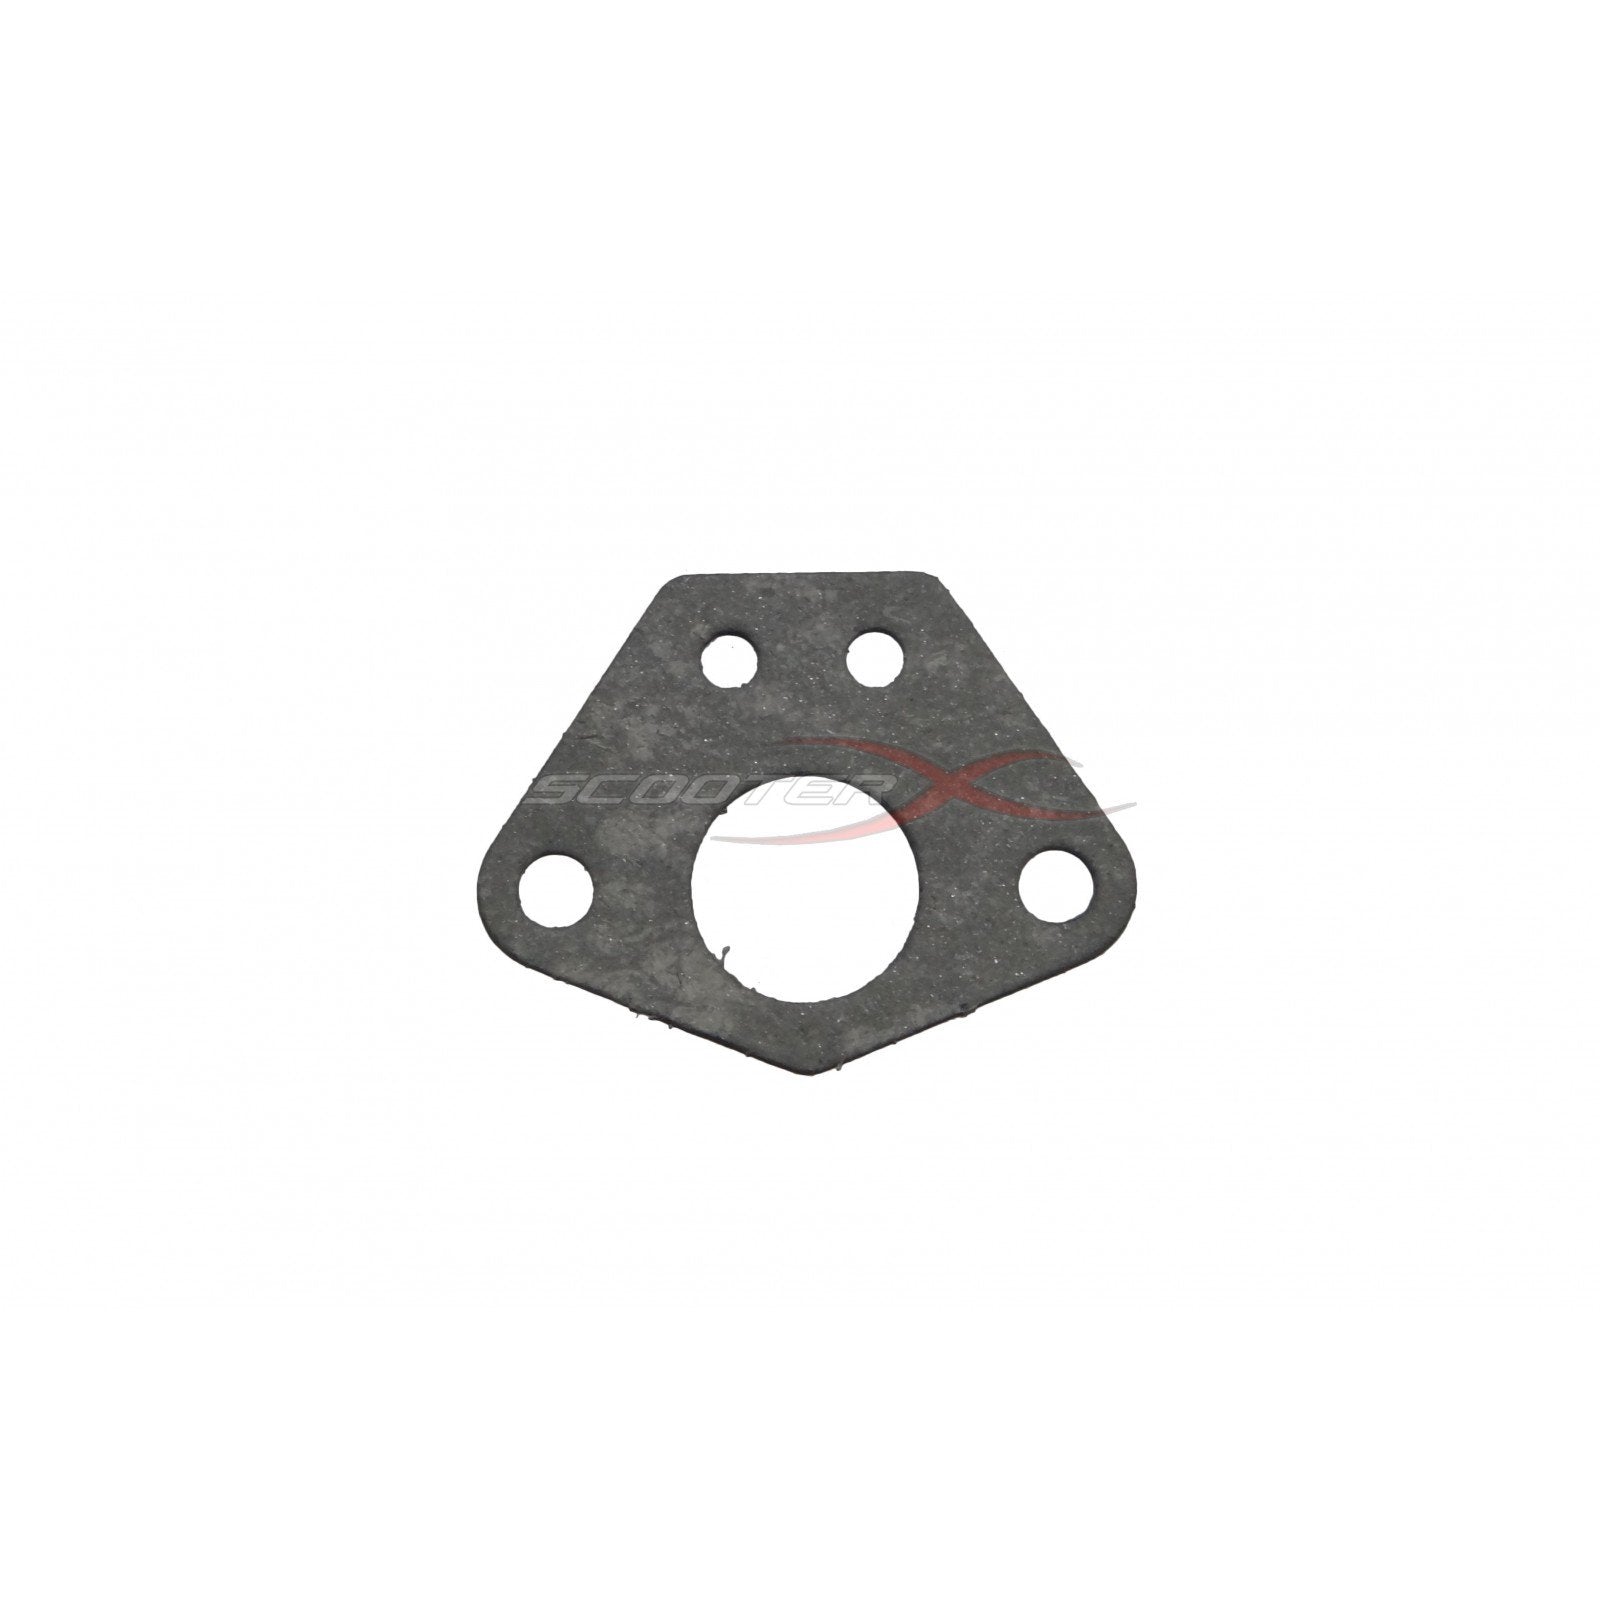 ScooterX CARBURETOR GASKET For 49-52cc Gas Scooters